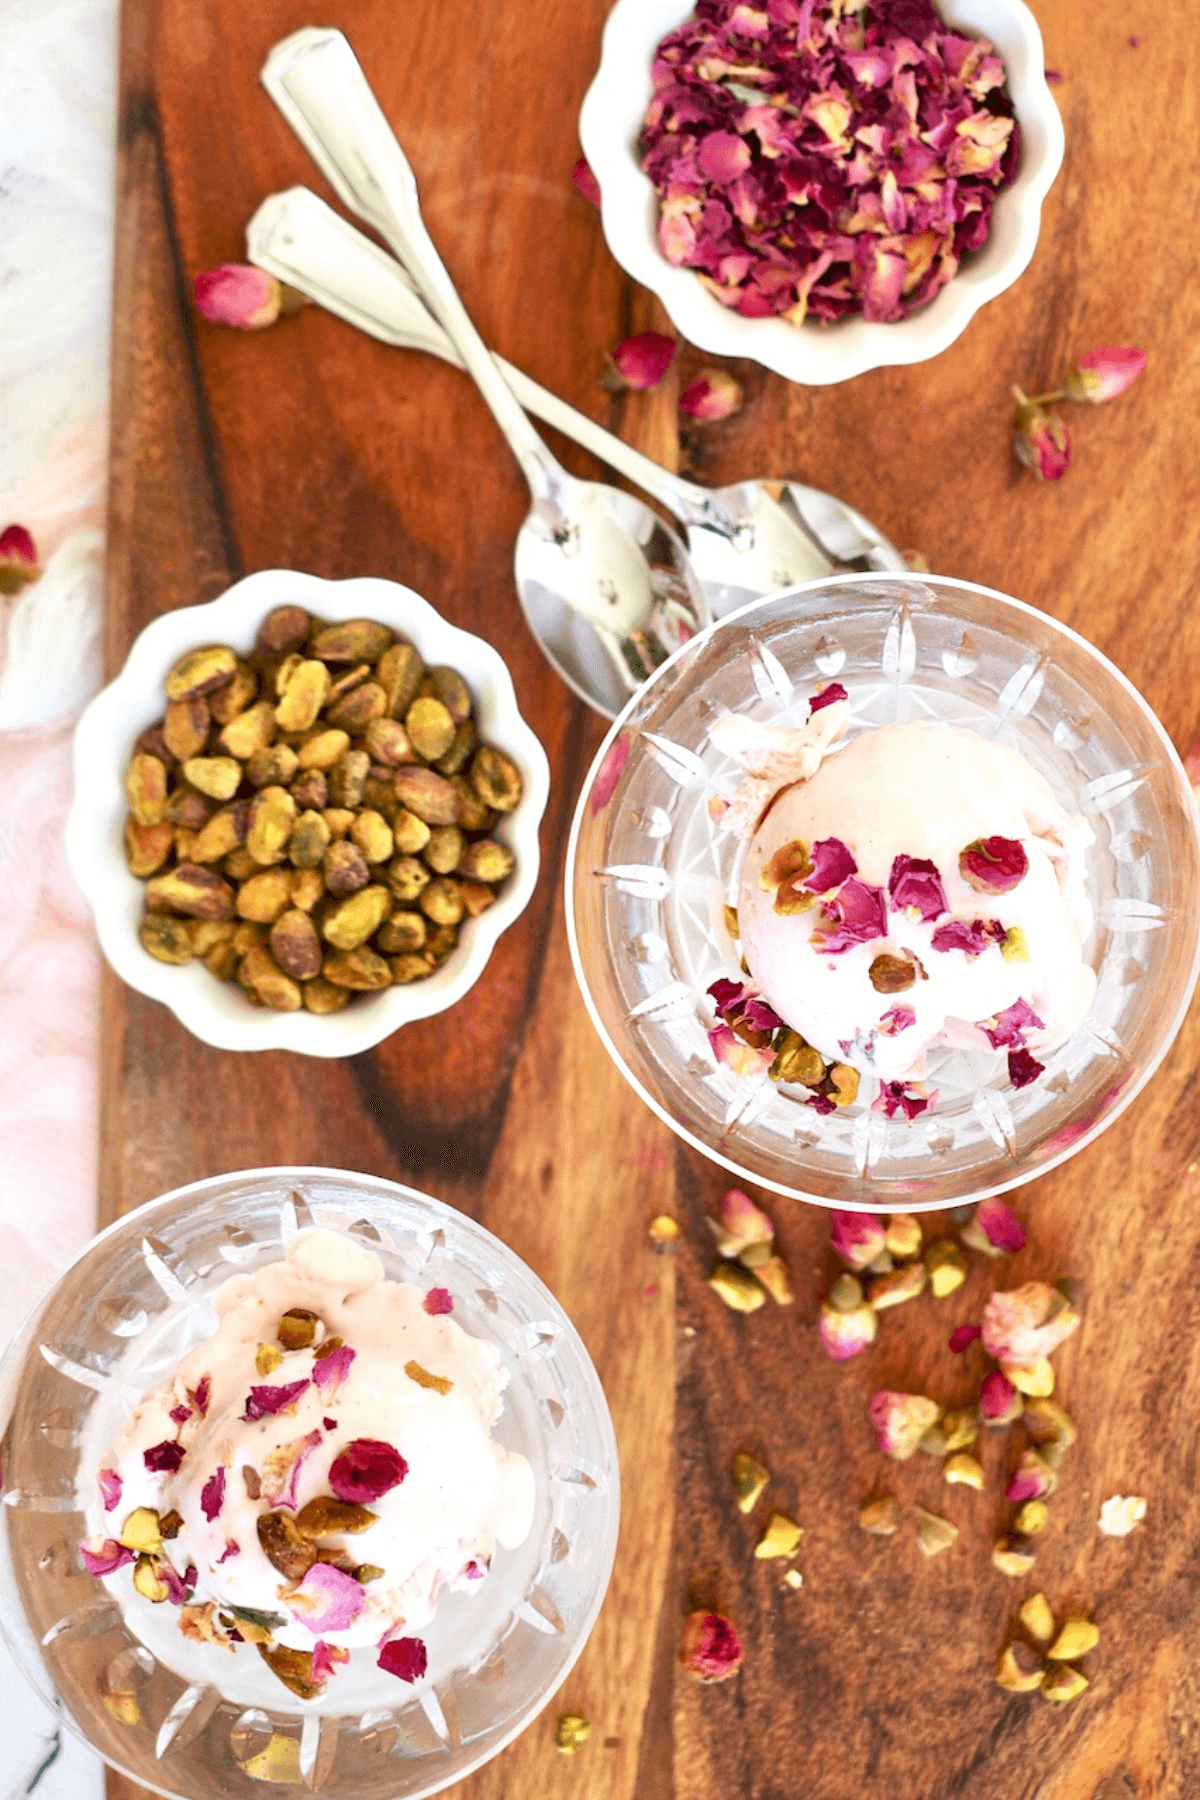 Rose Ice Cream in pretty glasses on wooden cutting board with rose petals, spoons and pistachios for garnish.